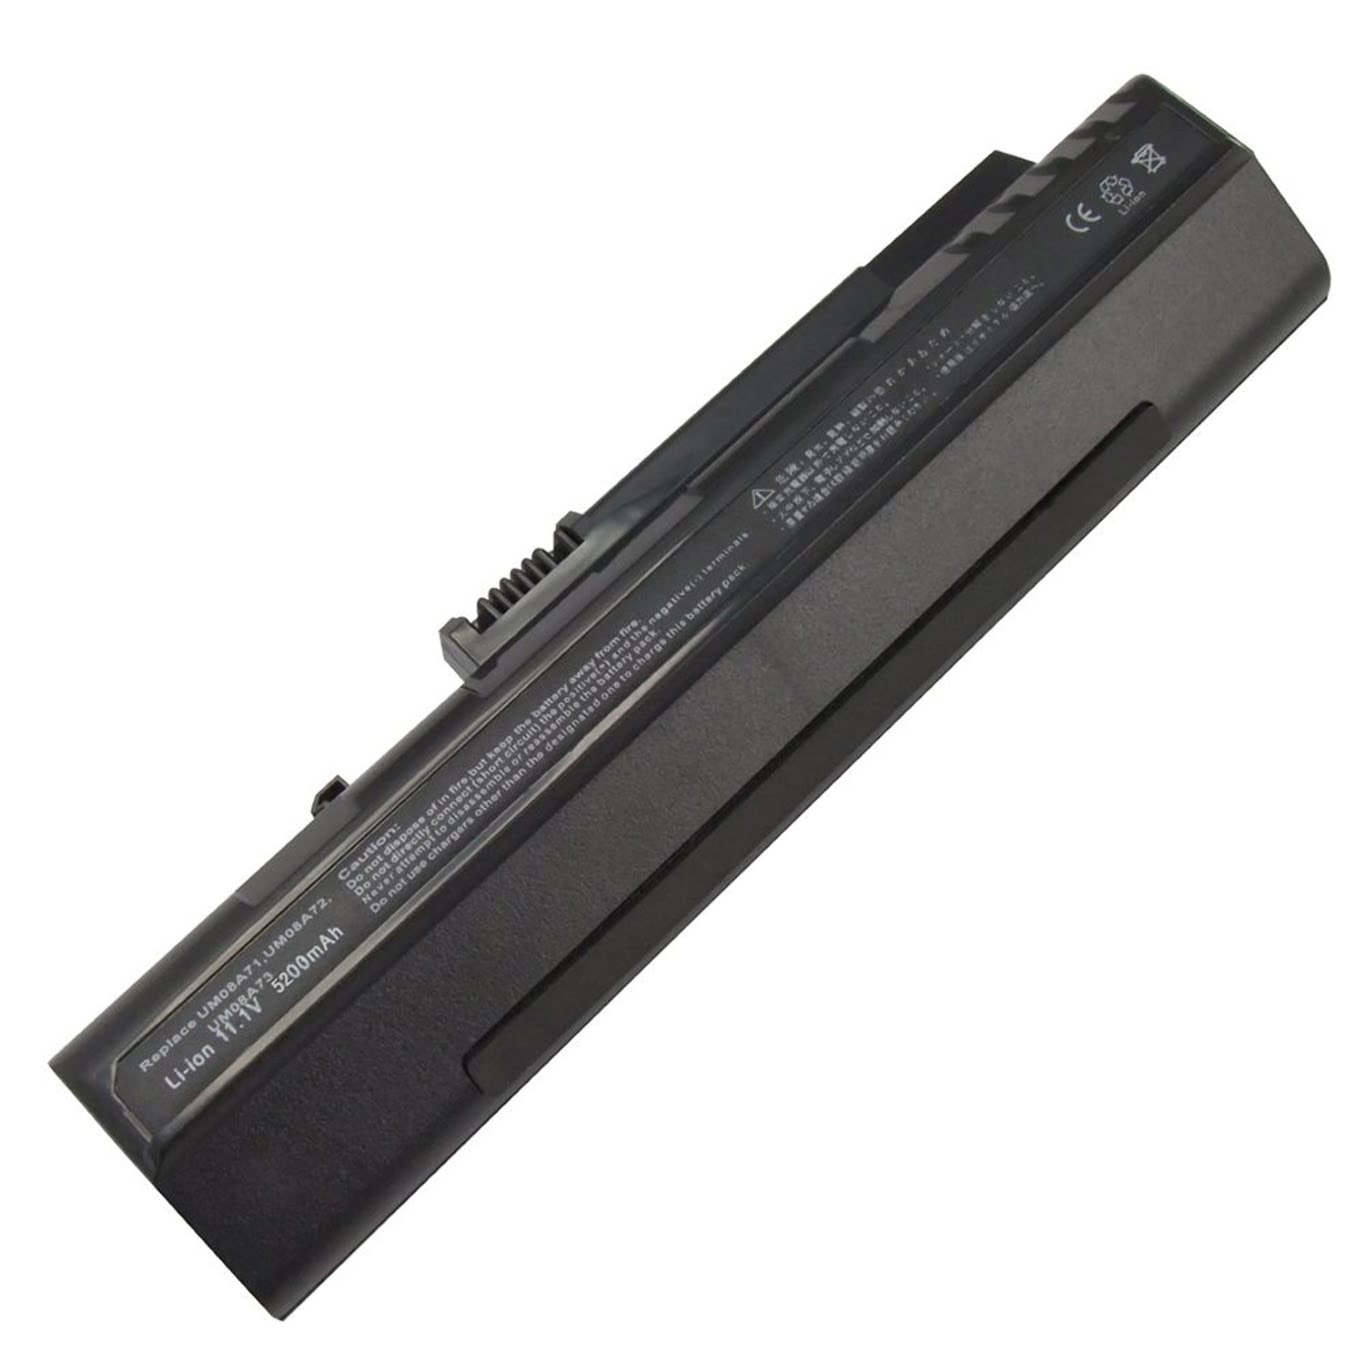 LC.BTP00.017, LC.BTP00.043 replacement Laptop Battery for Acer Aspire One 10.1